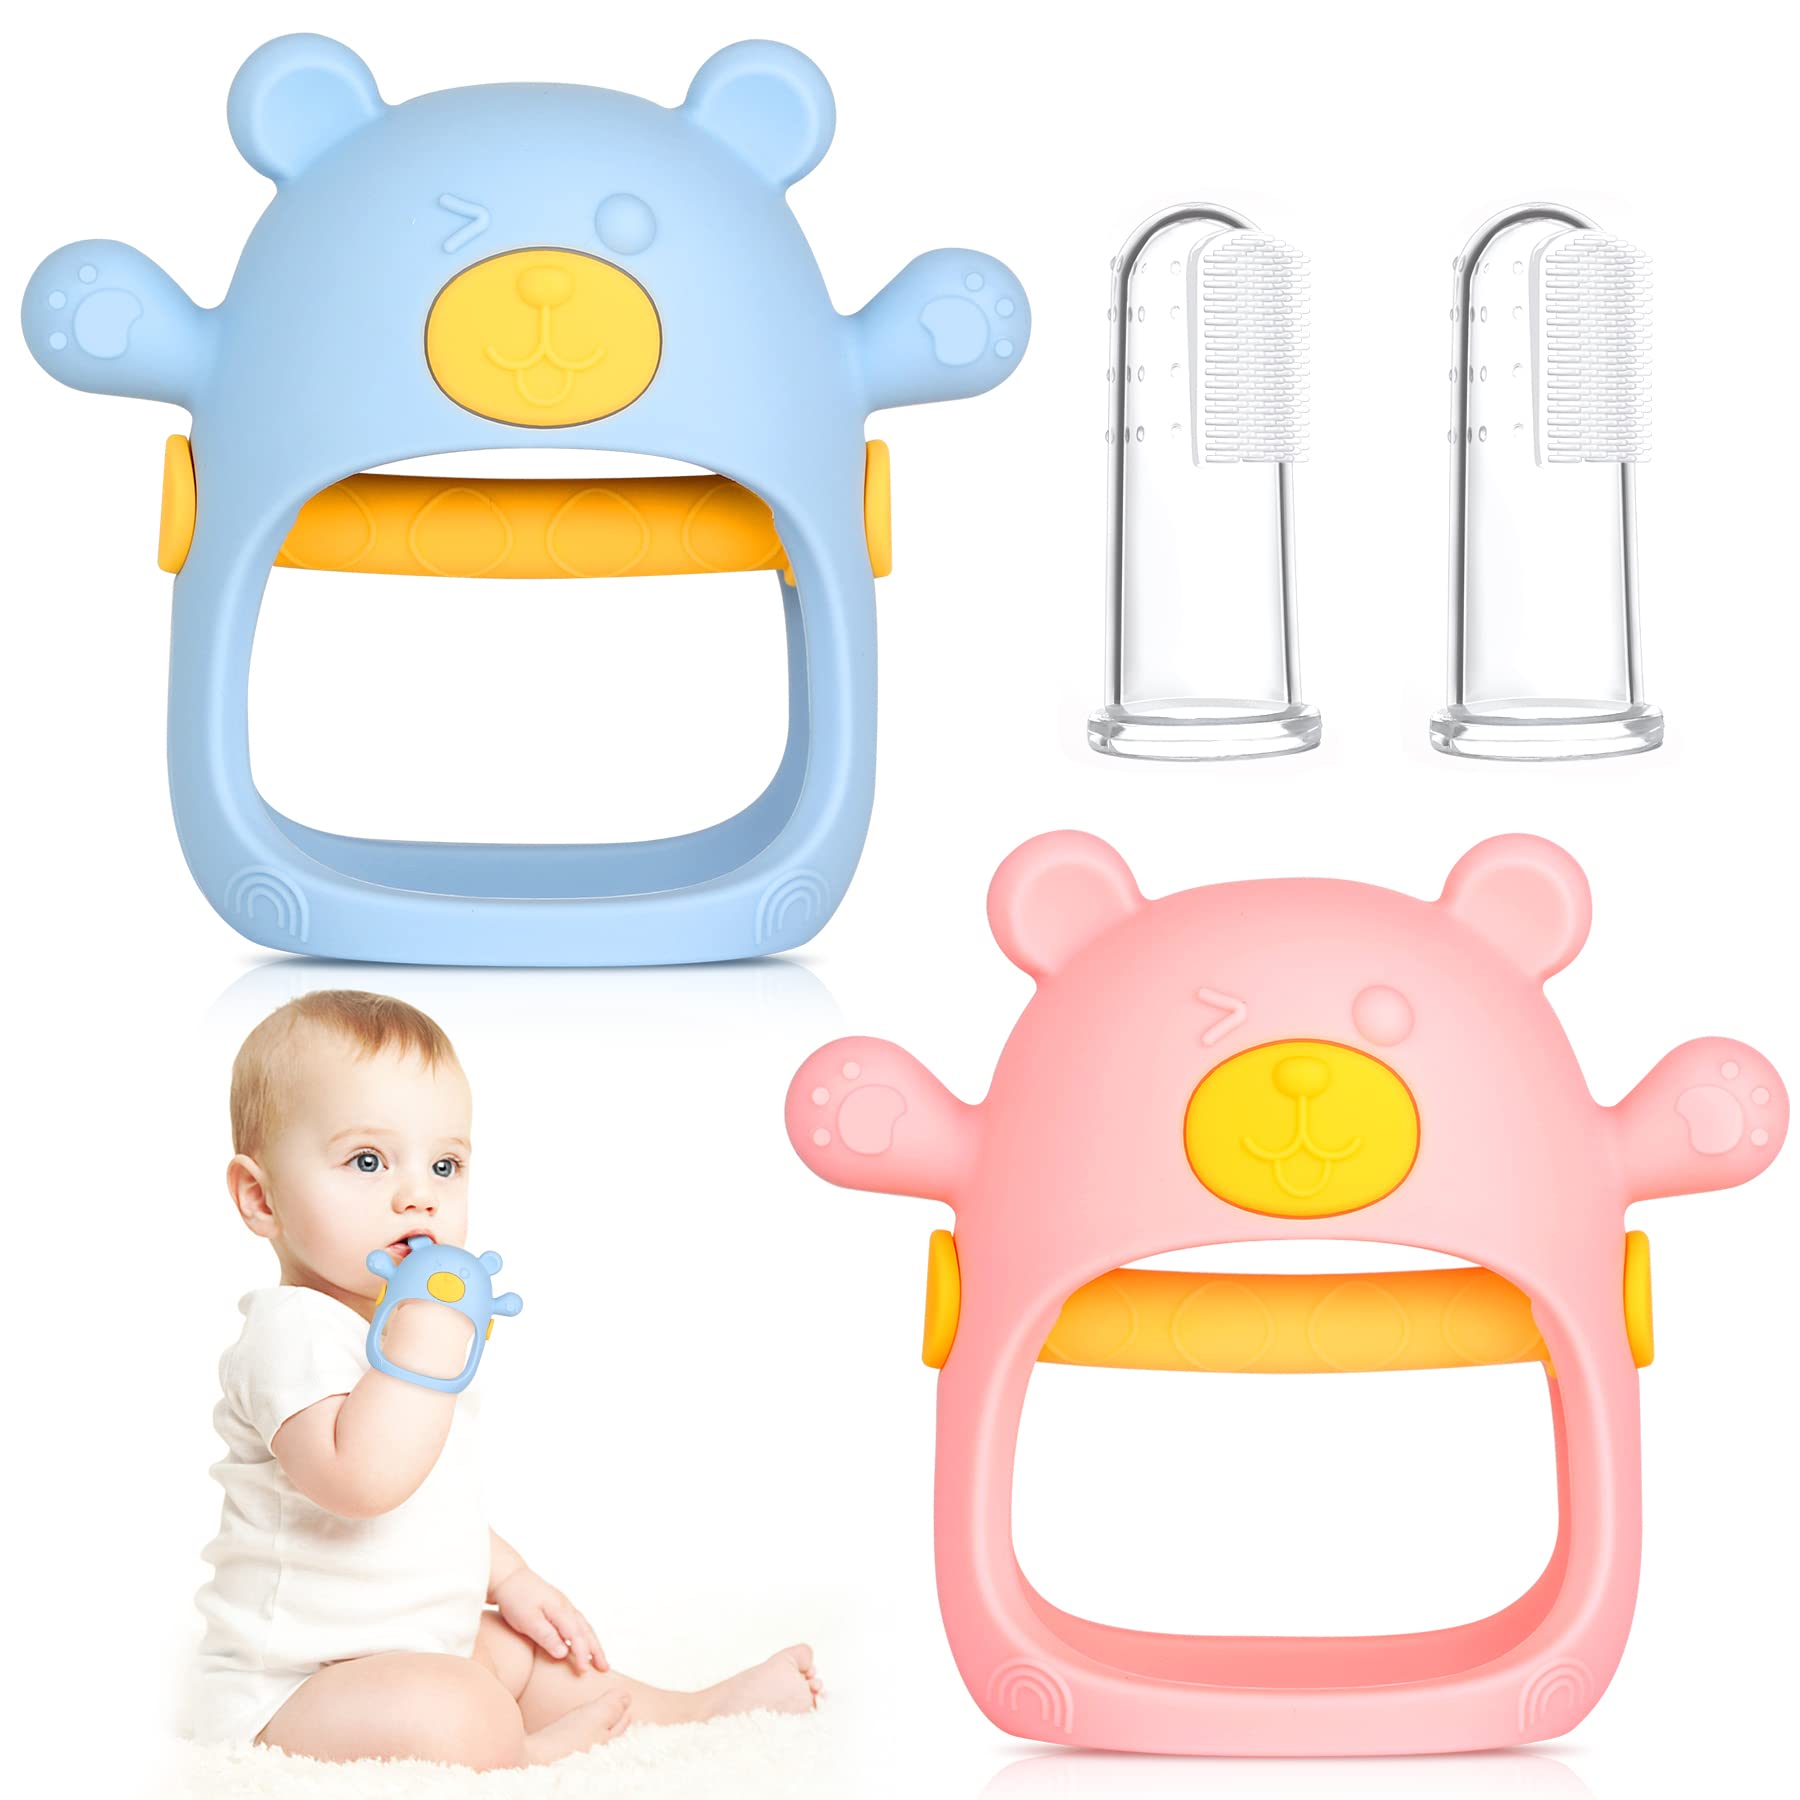 Cleaning tools for baby from 6 months to 3 years old